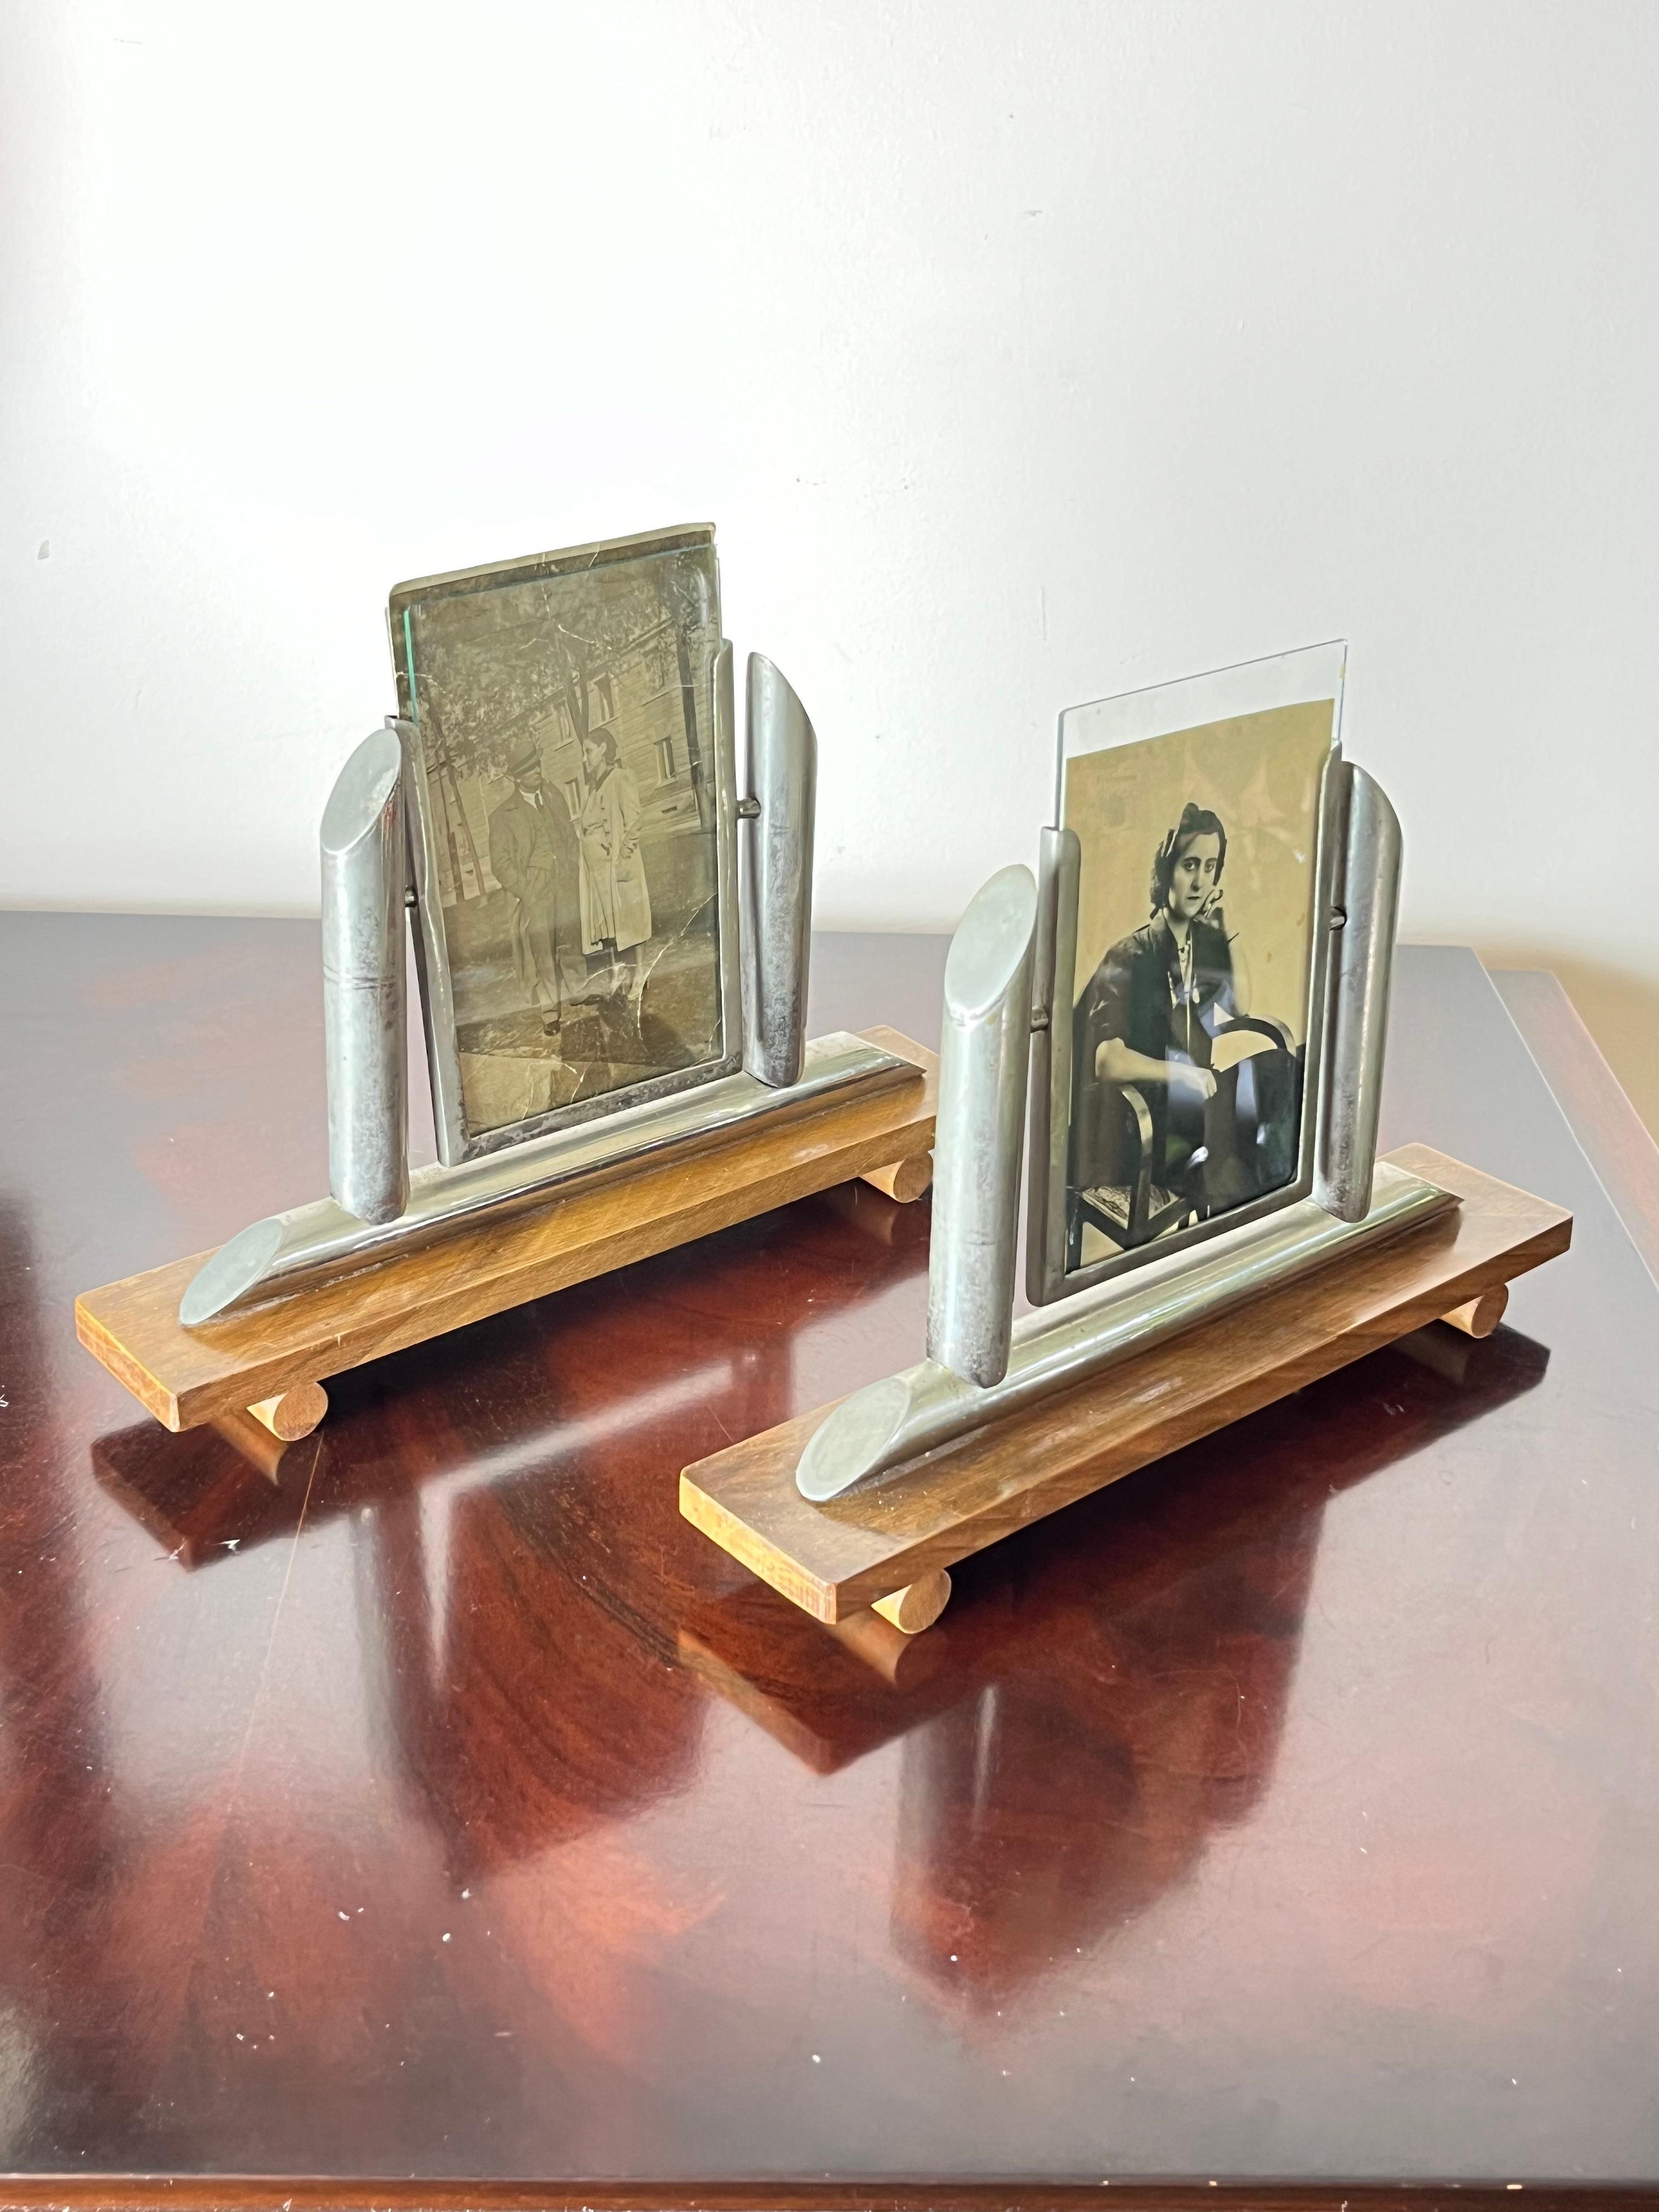 Pair of Art Decò Photo Holders, Italy, 1940s For Sale 2